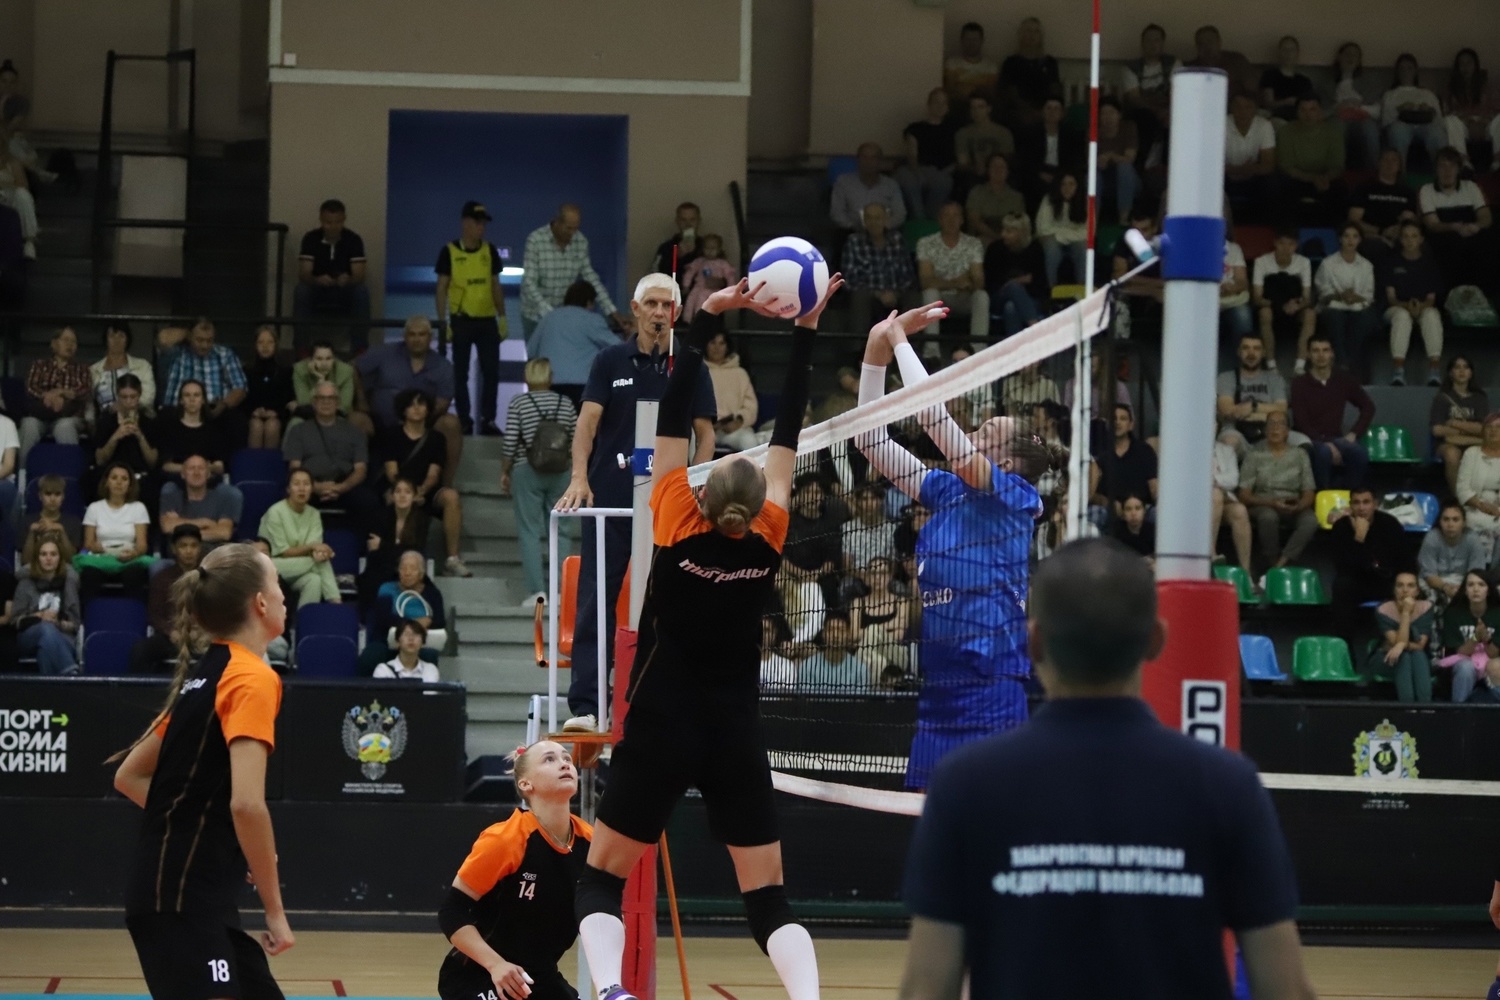 Highlights of the meeting between the Amur Tigresses from Khabarovsk and Dynamo from Vladivostok have been published